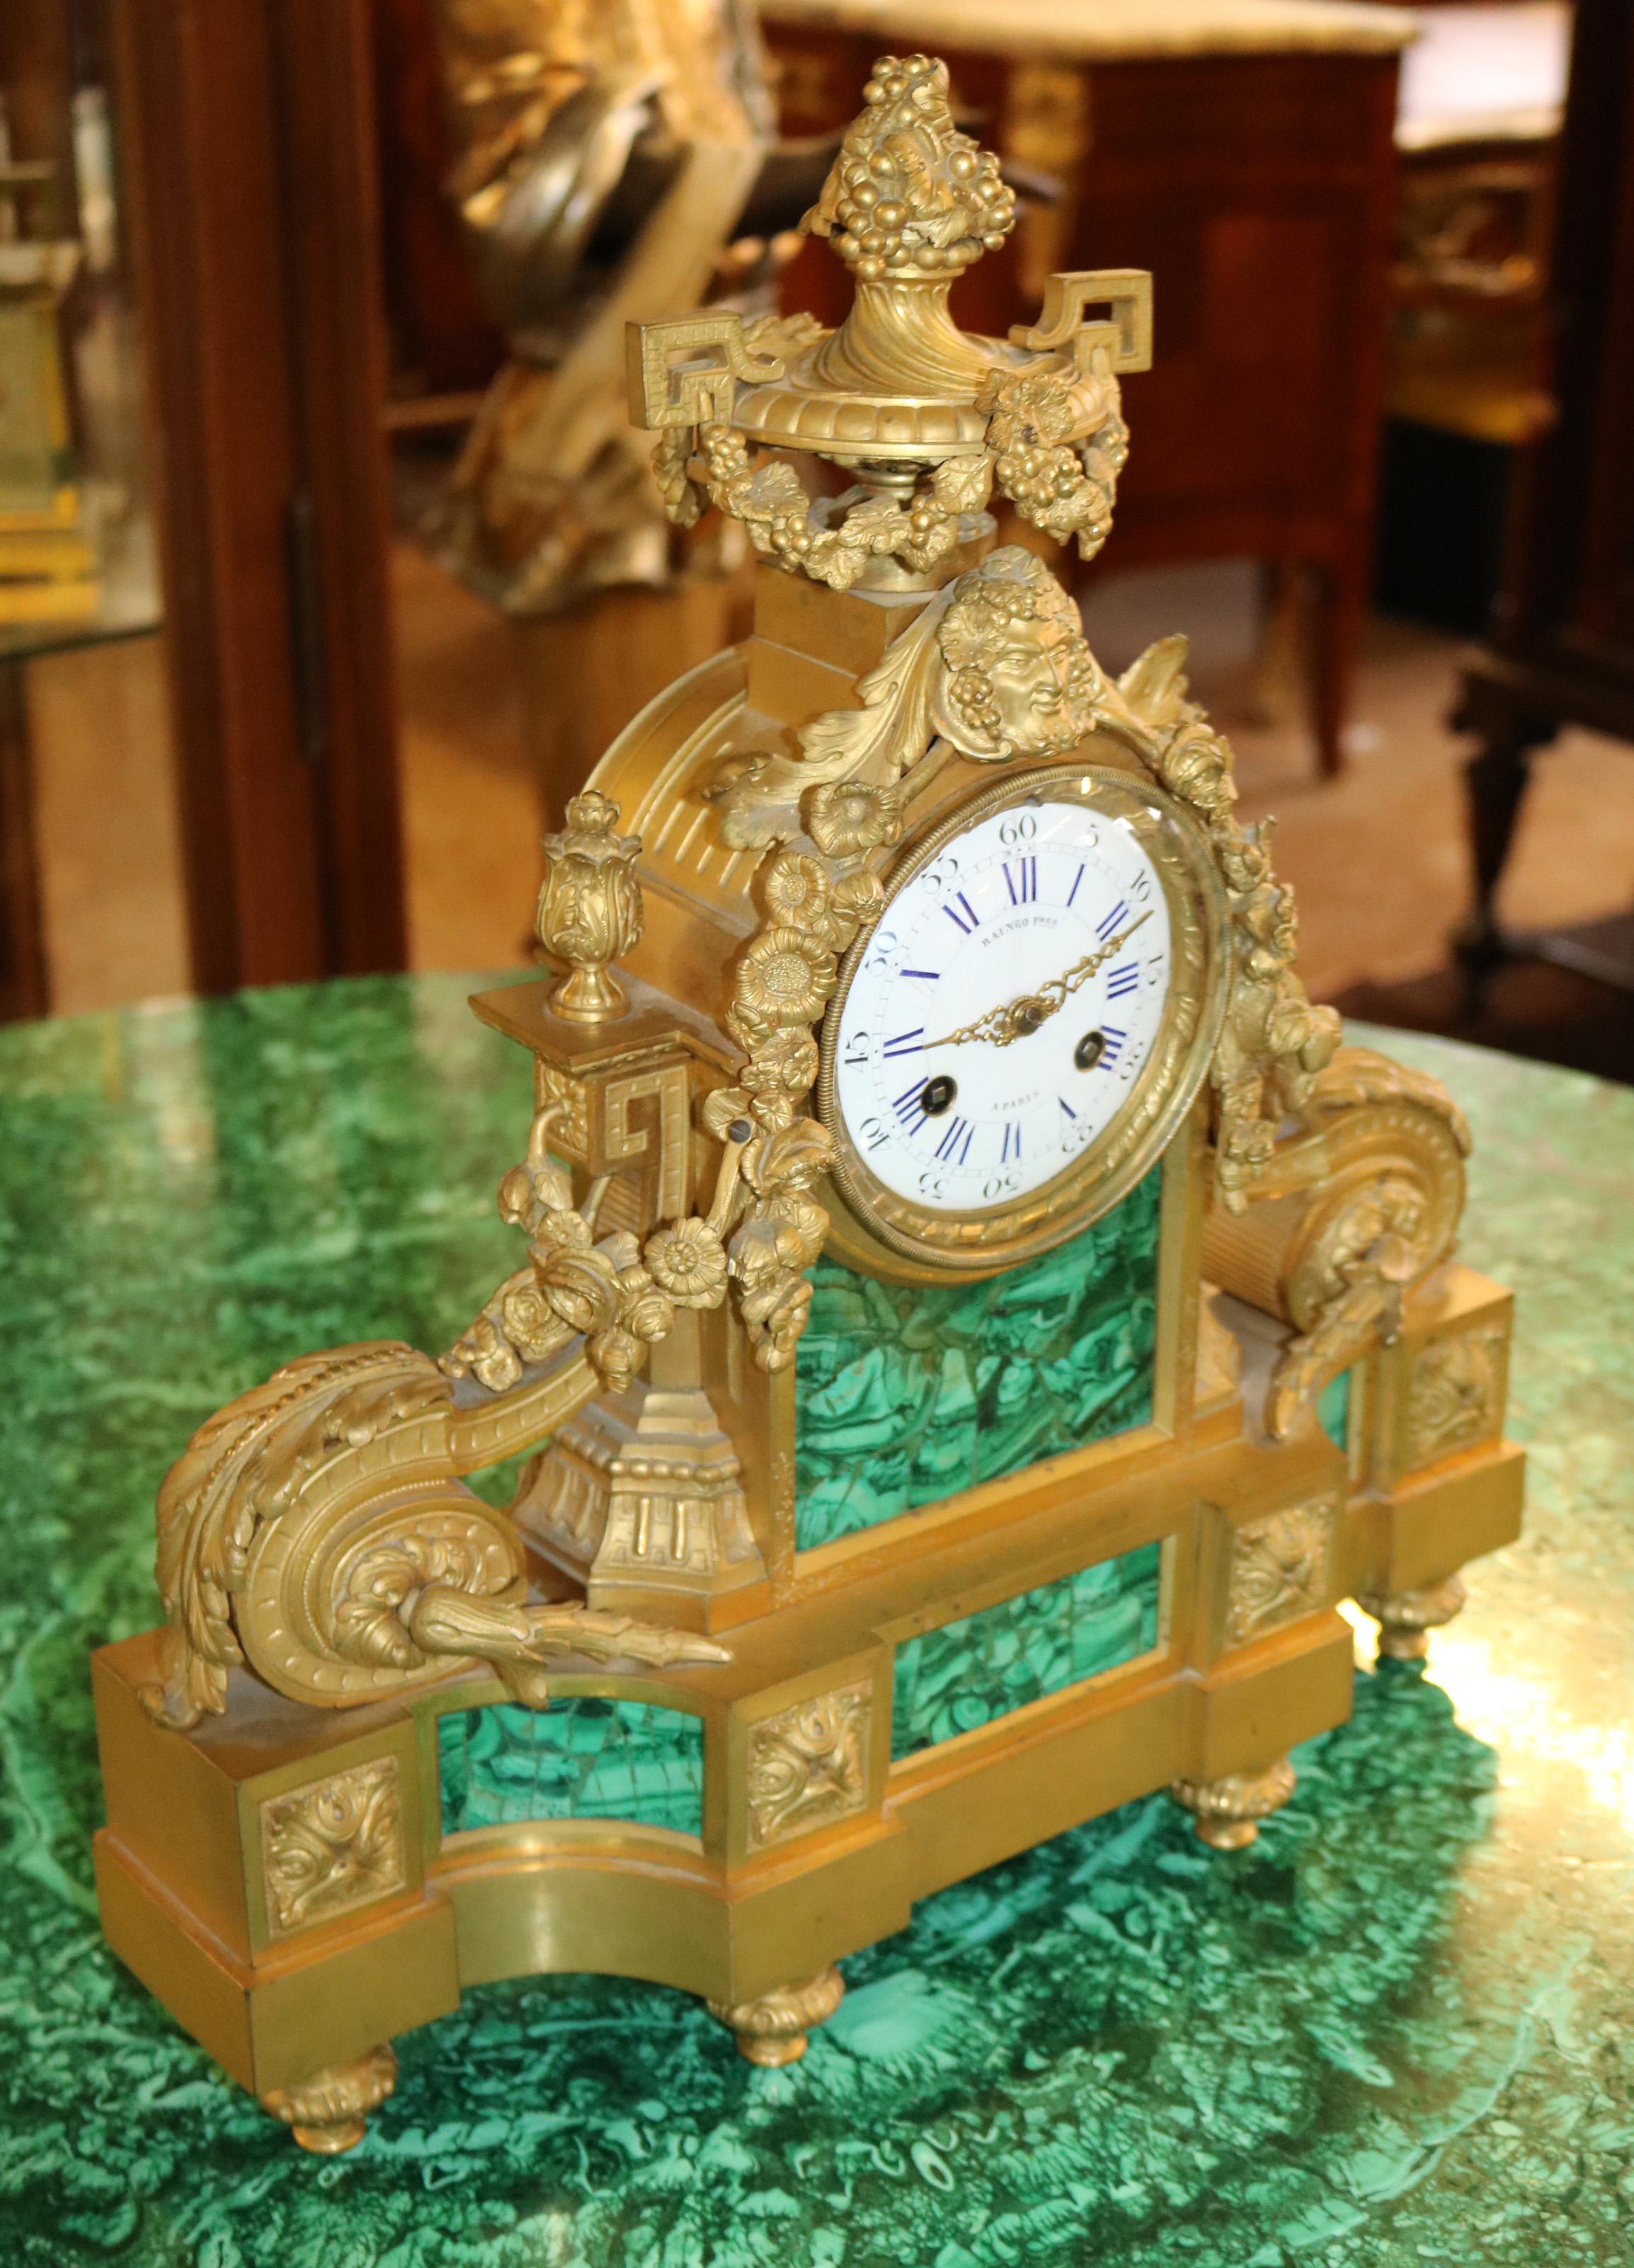 This stunning clock was made in Paris in the 19th century by Raingo Freres one of the top clock makers of the time! The clock is fine cast bronze with malachite inlaid throughout the bronze is crisp and thick. The movement is very high quality!
